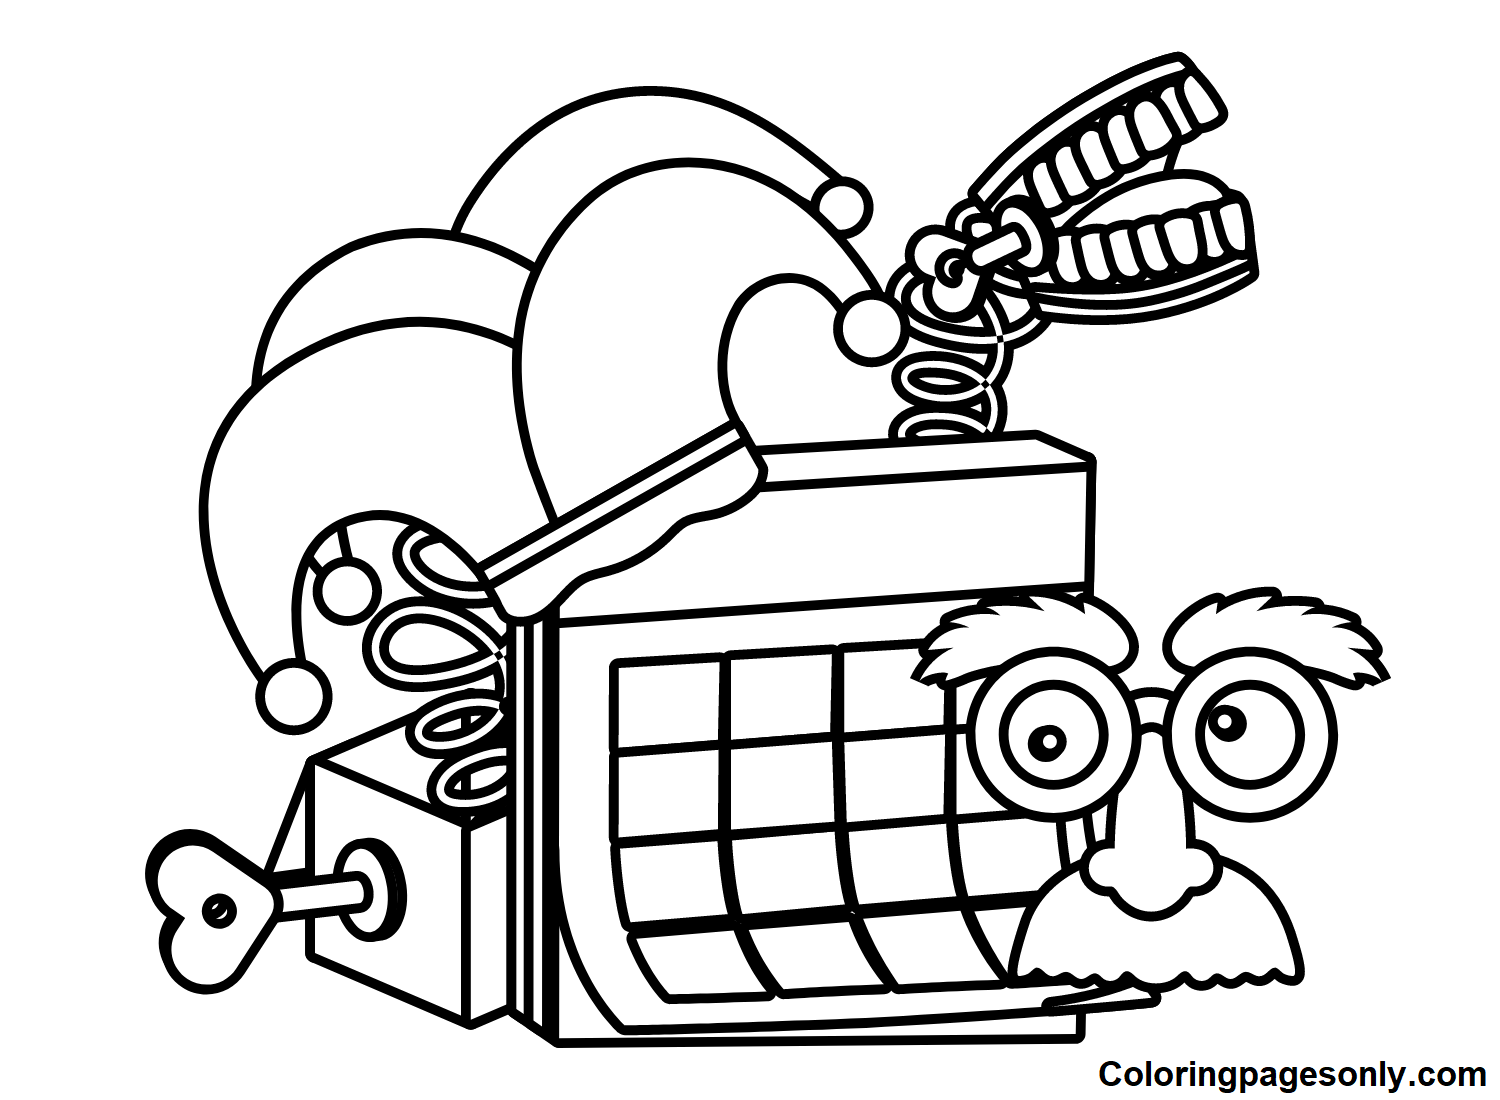 Print April Fools’ Day Coloring Page